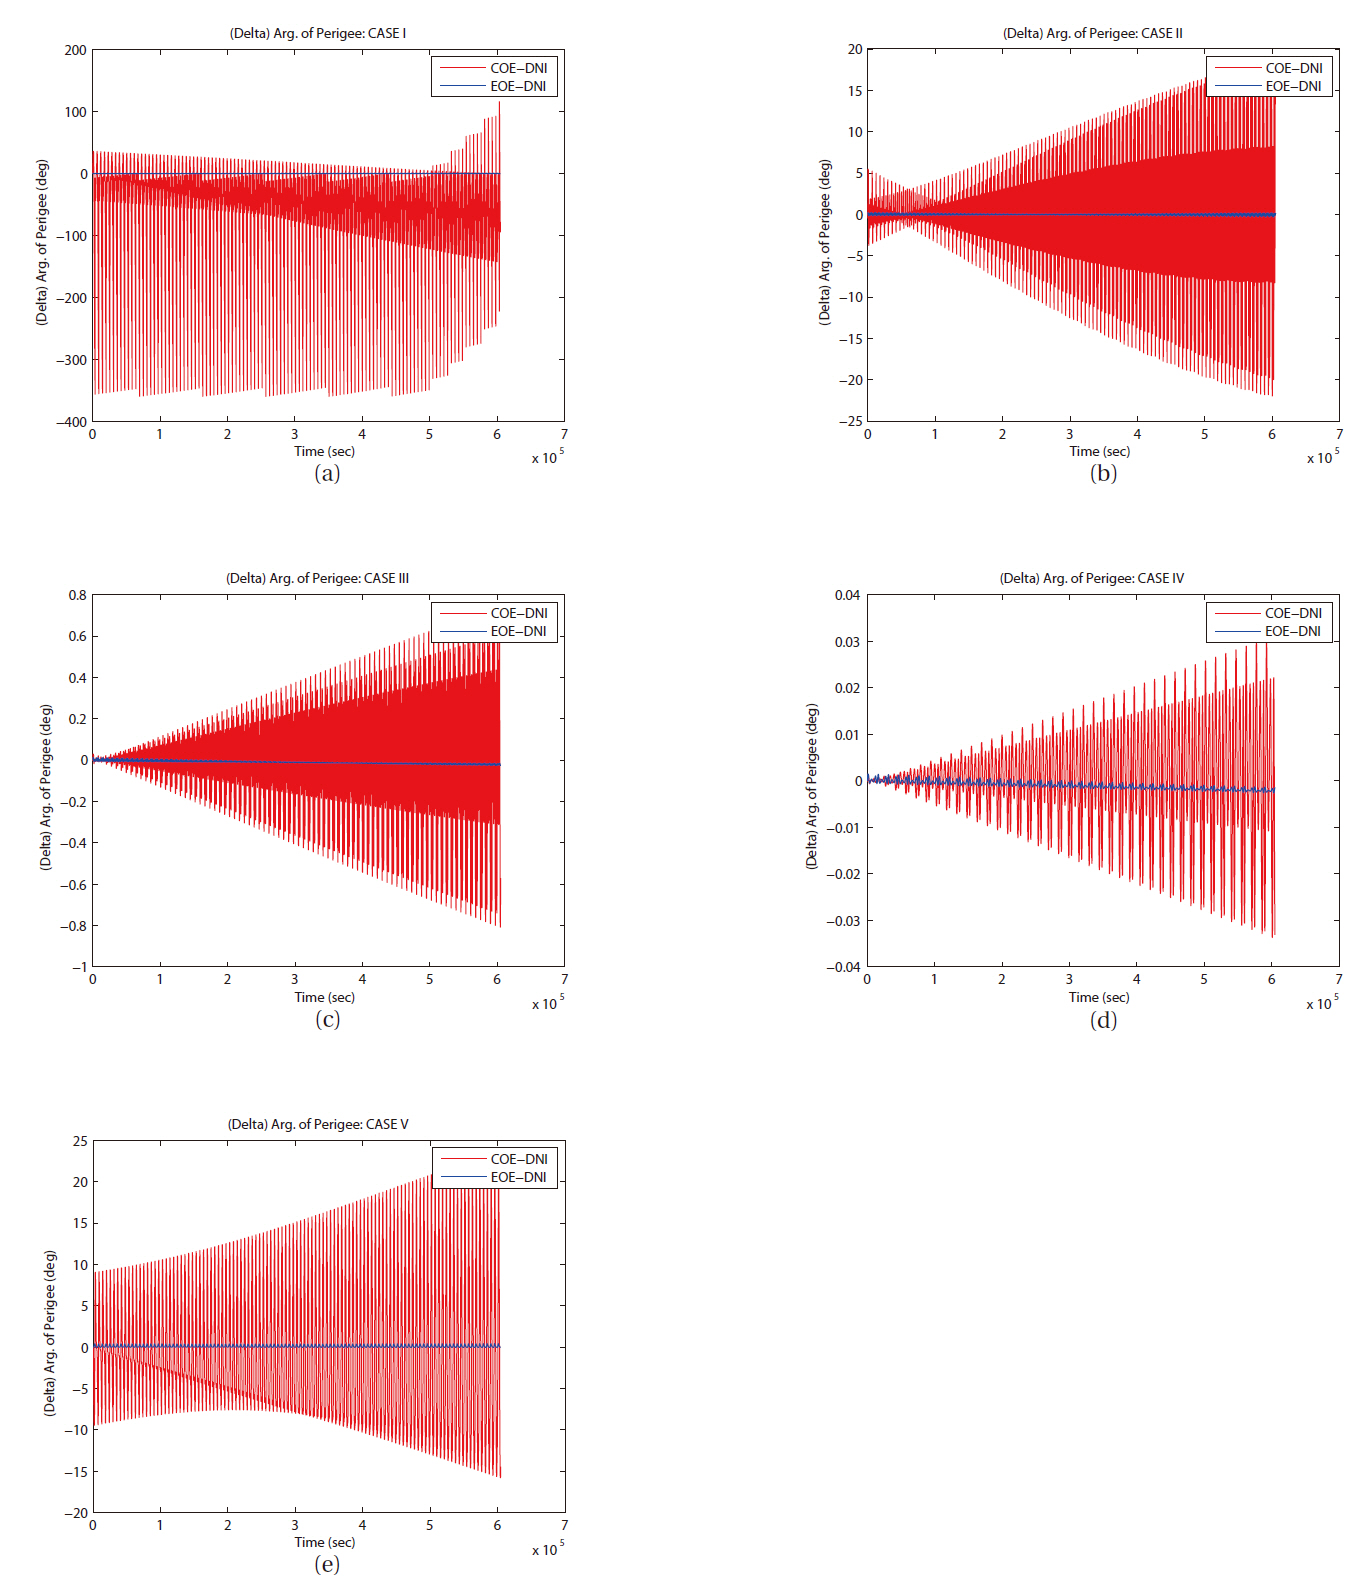 The differences in arguments of perigees of two semi-analytical solutions from direct numerical integration (DNI) result with the J2 perturbation for all cases in seven days. Red line by COE LPE-DNI blue line by EOE LPE-DNI.